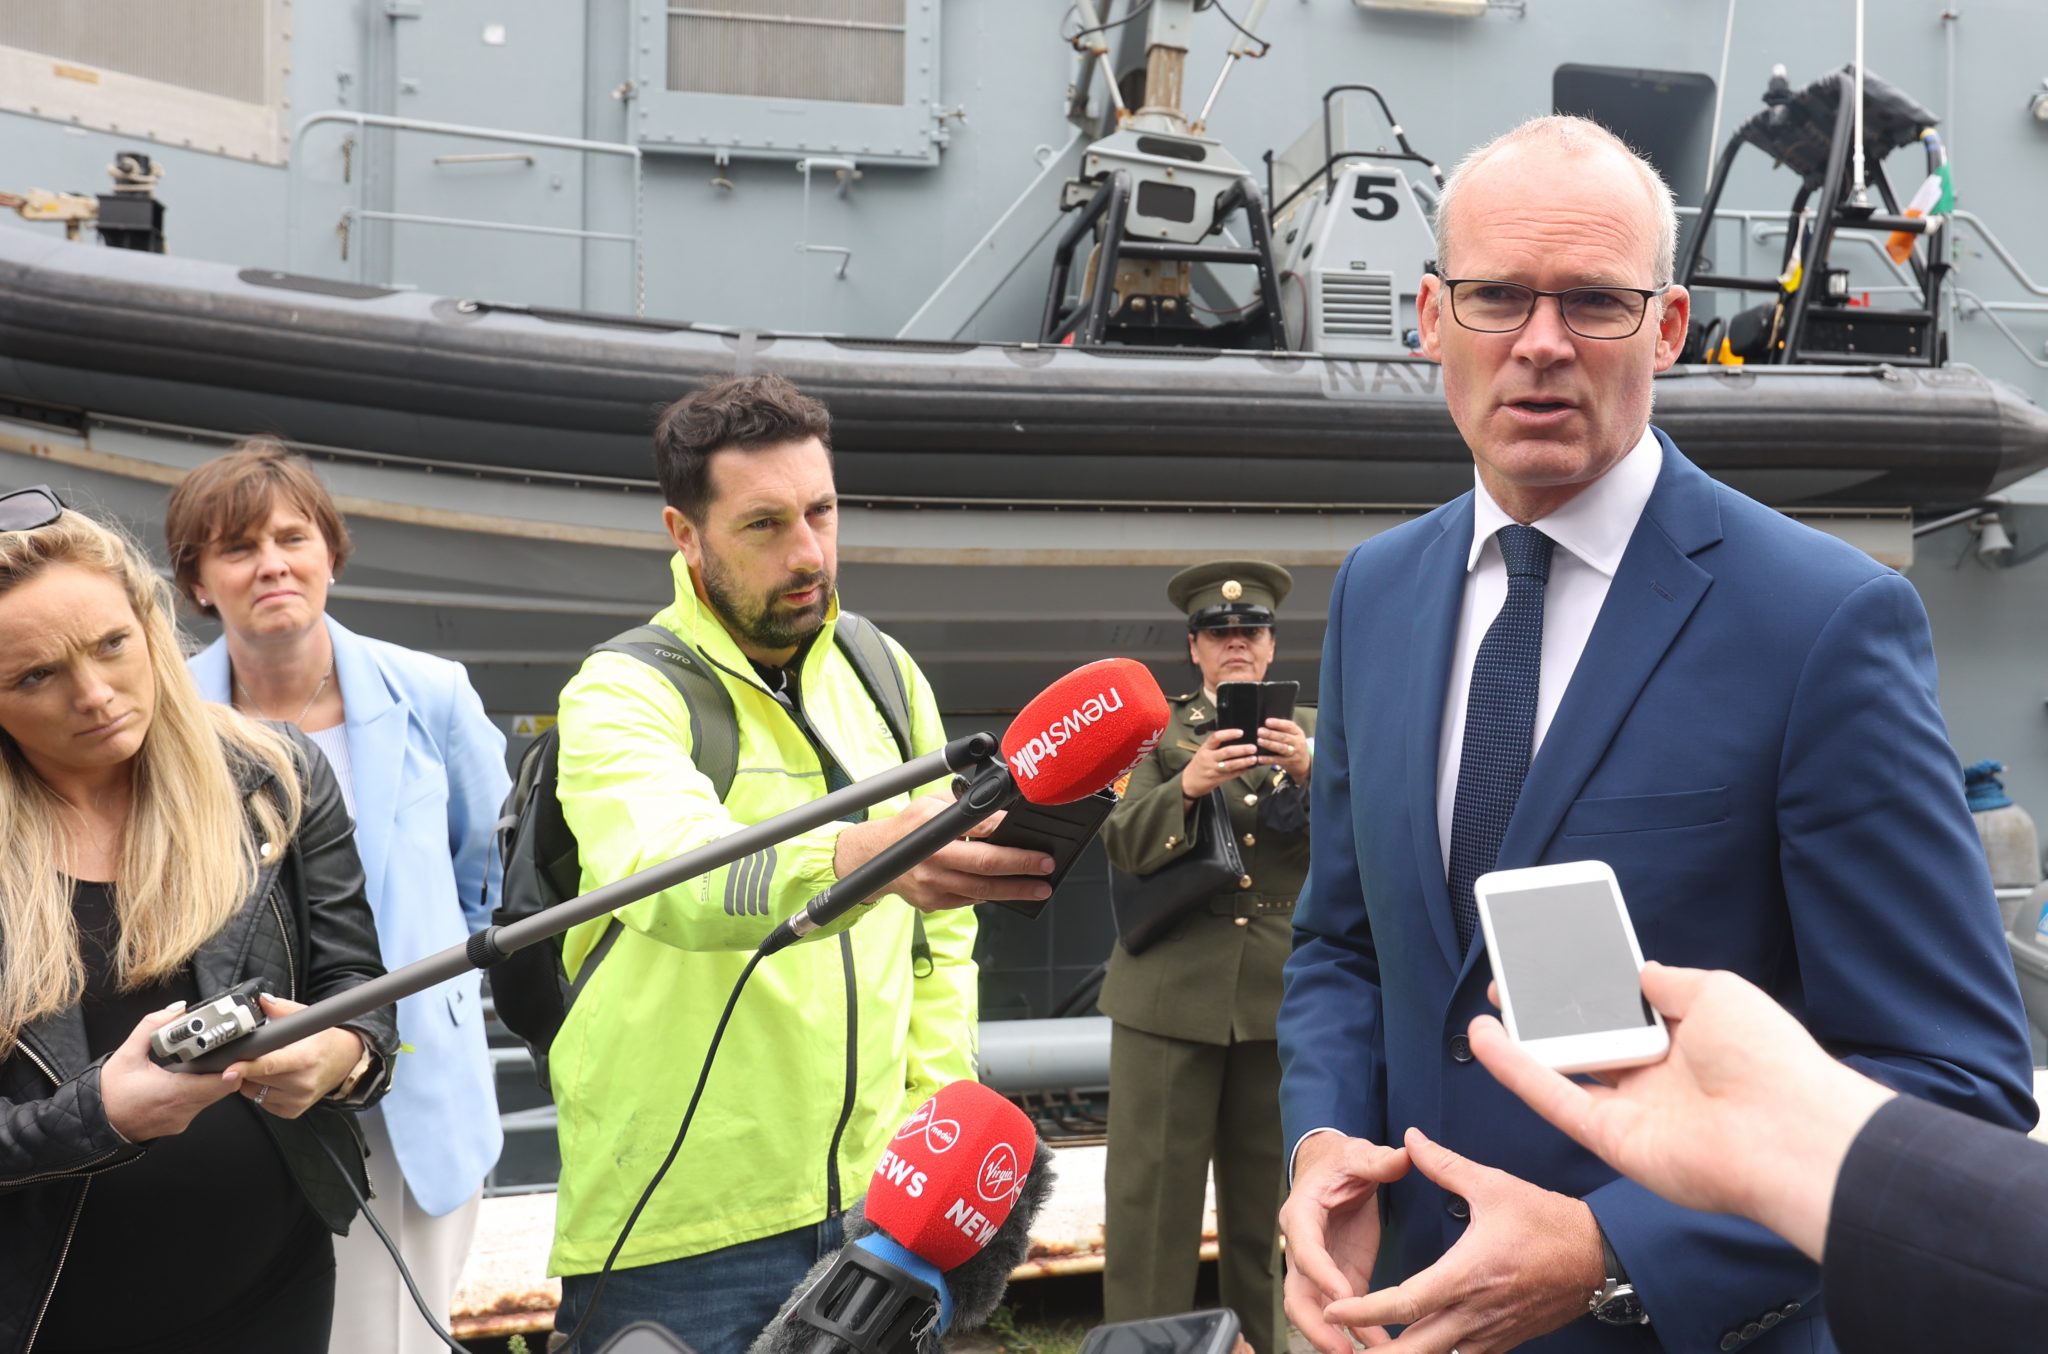 Foreign Affairs Minister Simon Coveney speaks to the media after disembarking the L.É. Samuel Beckett on Sir John Rogerson's Quay